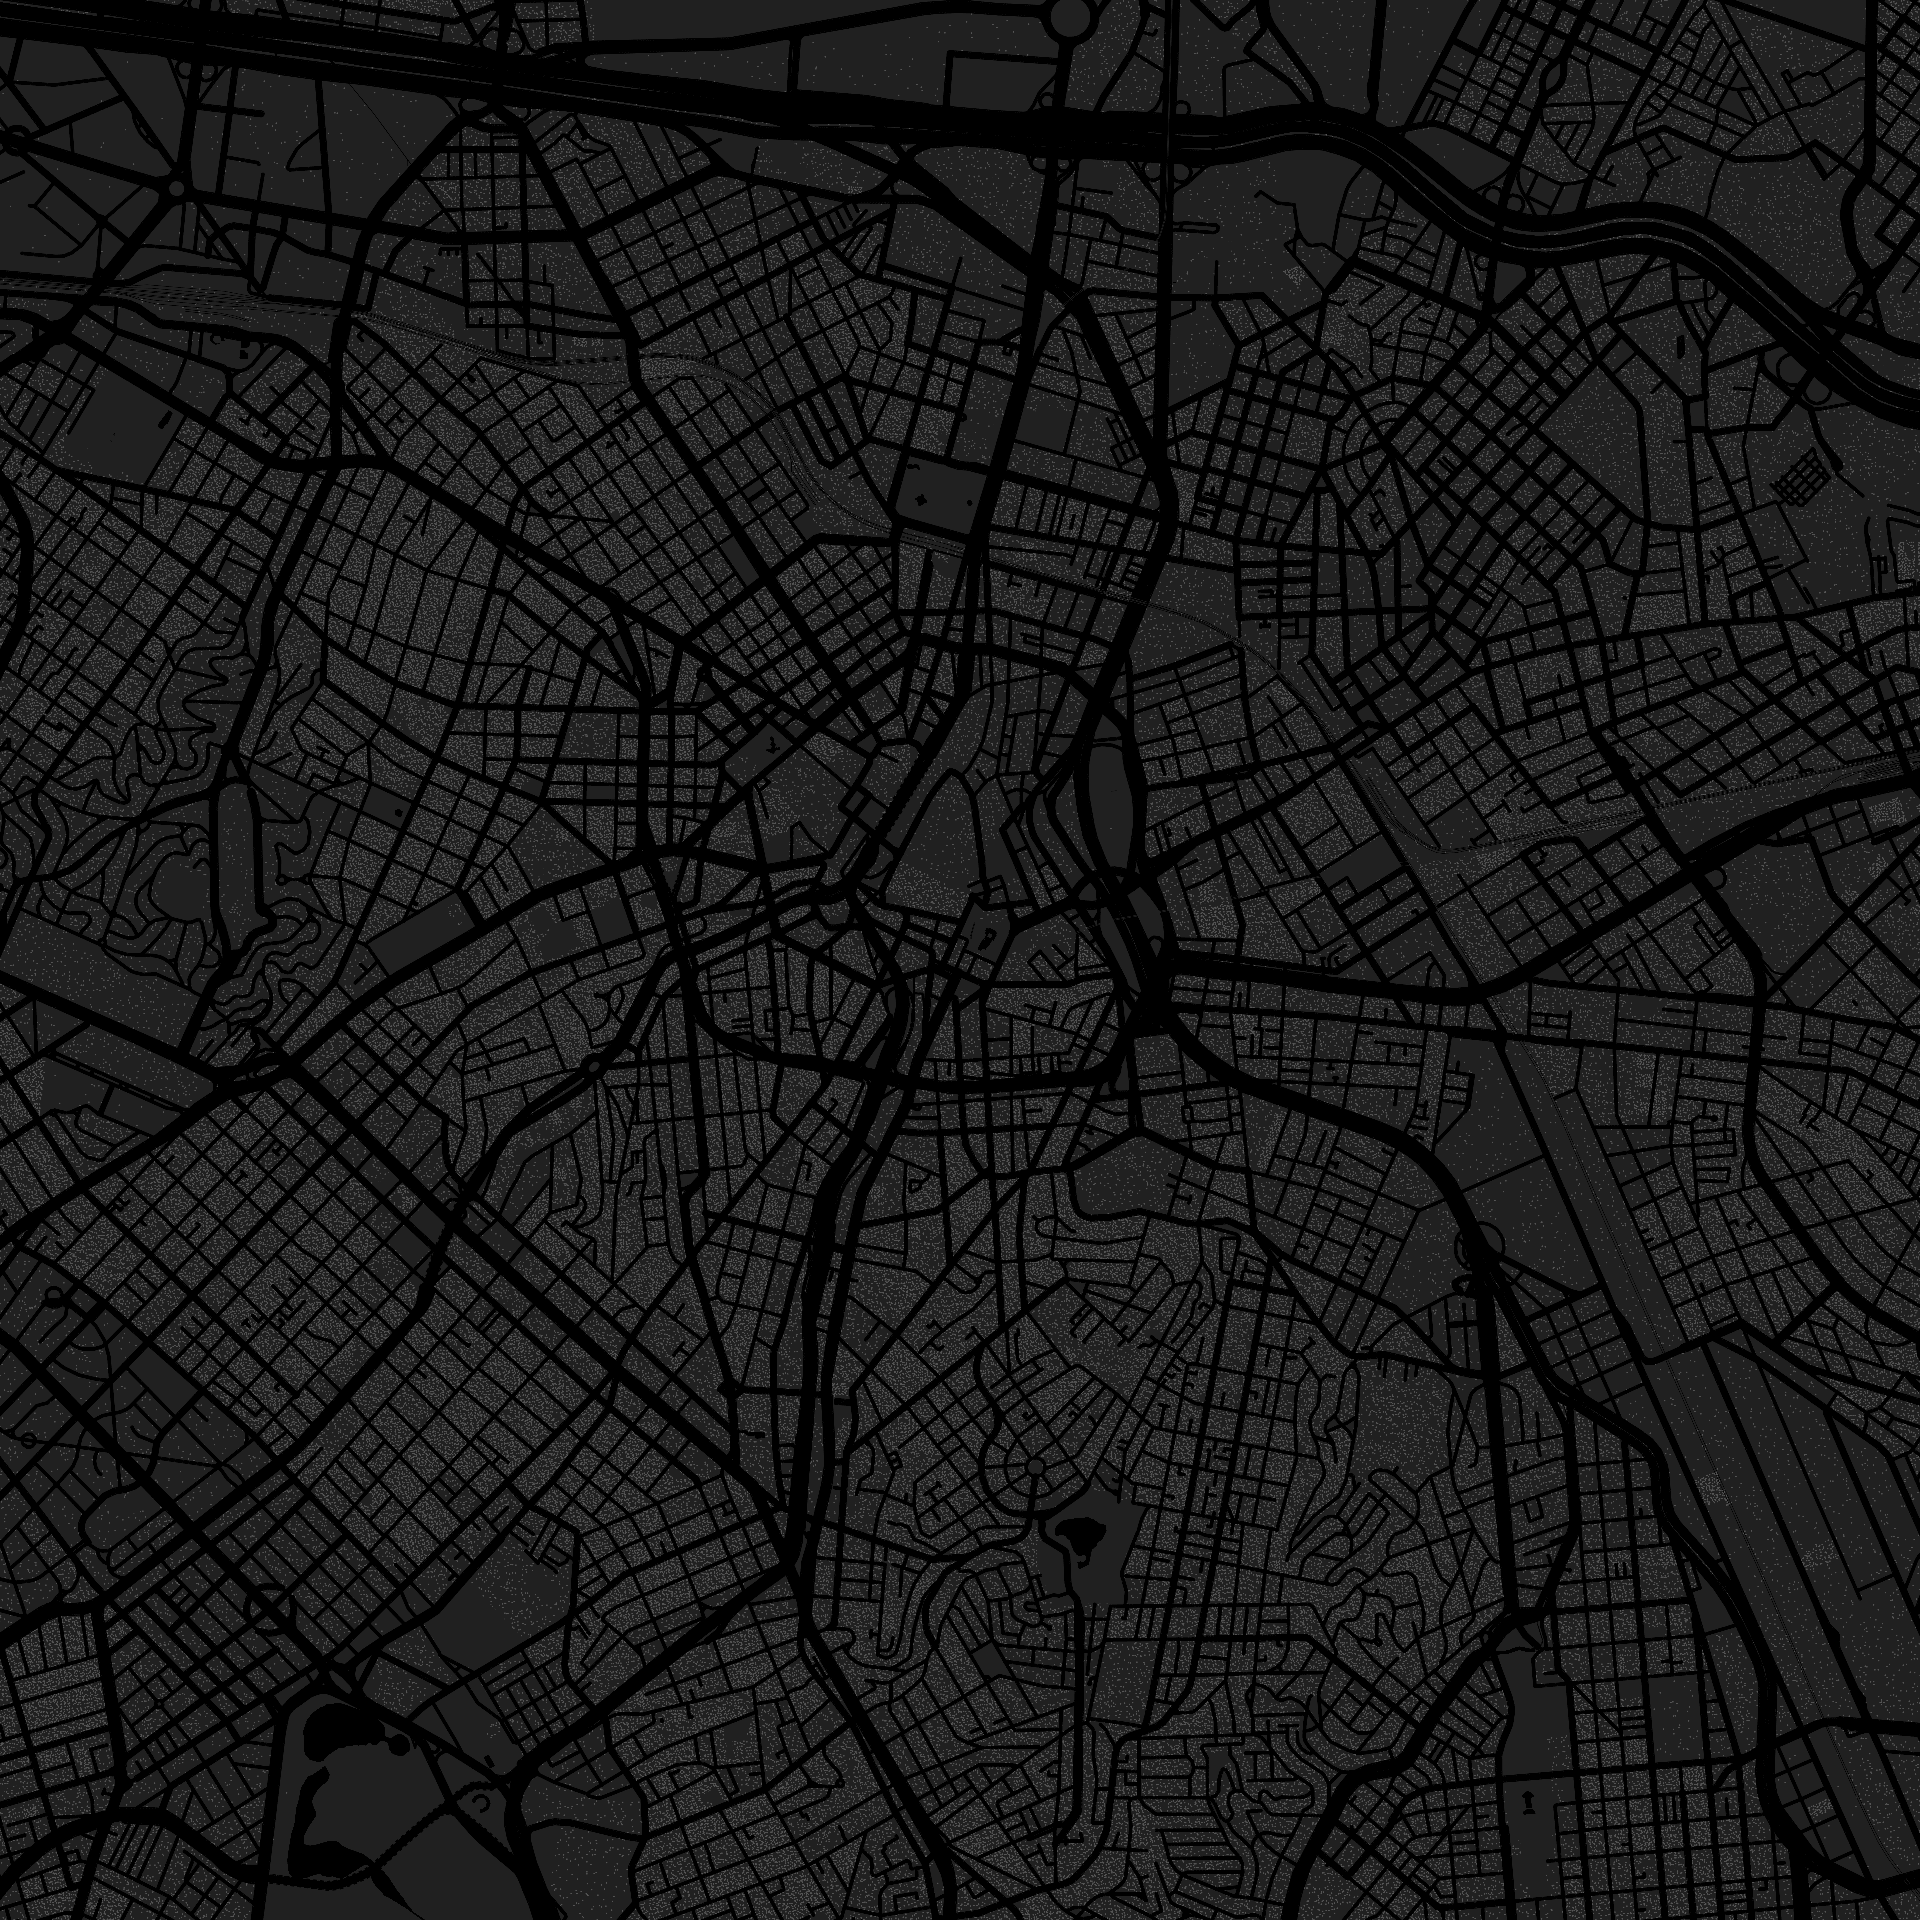 Just as an example, this map shows a metropolitan region with thousands of scattered dots (each dot represents a person who lives there).